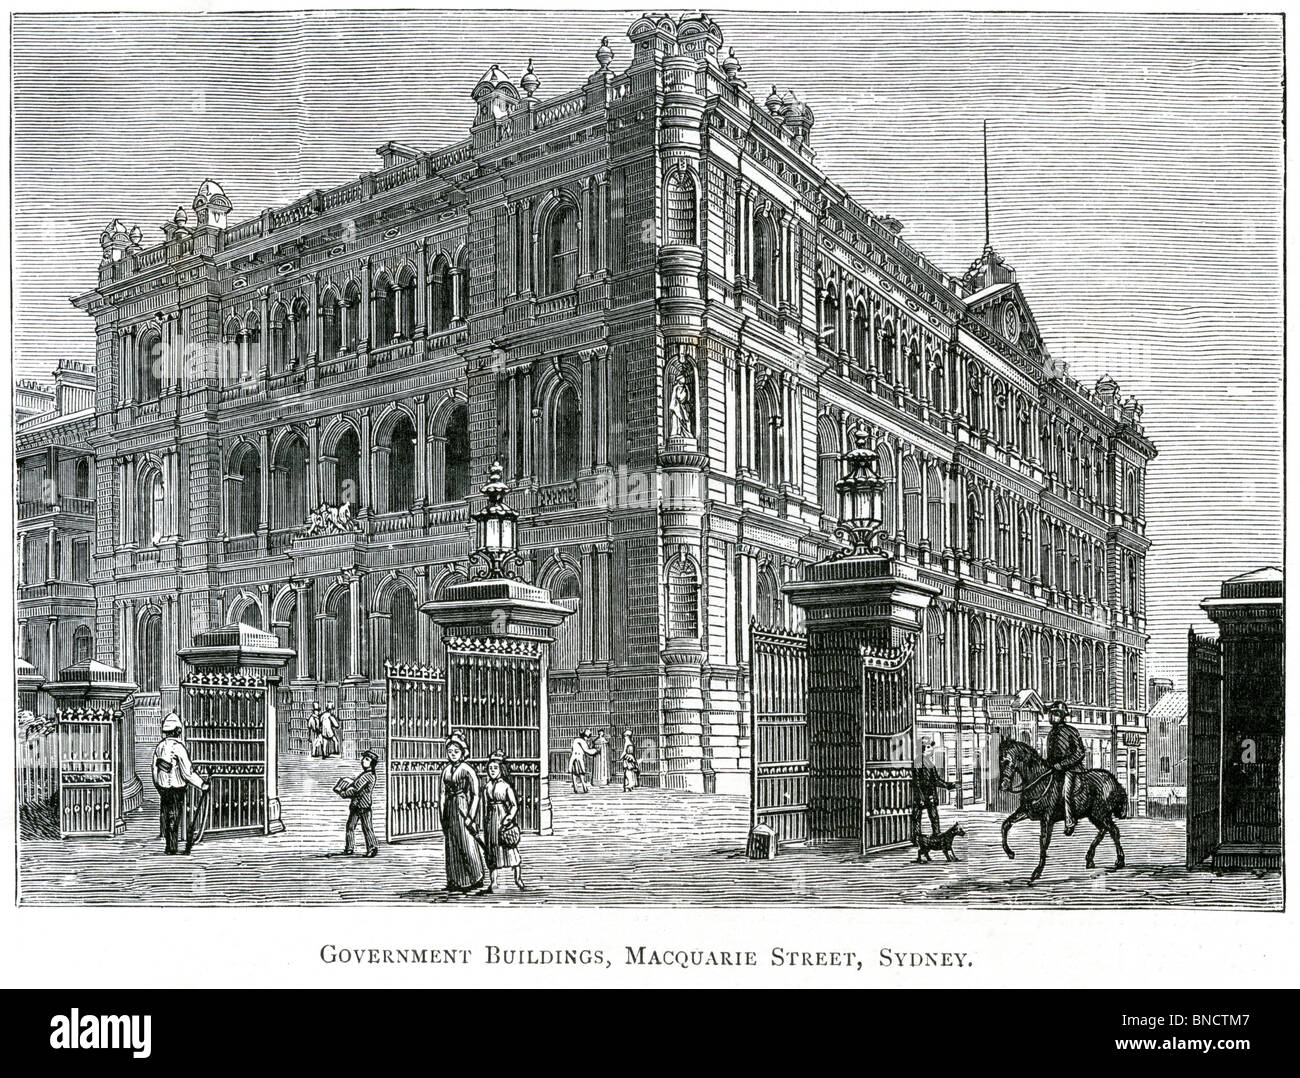 An engraving of Government Buildings, Macquarie Street, Sydney, New South Wales, Australia, published in a book printed in 1886. Stock Photo